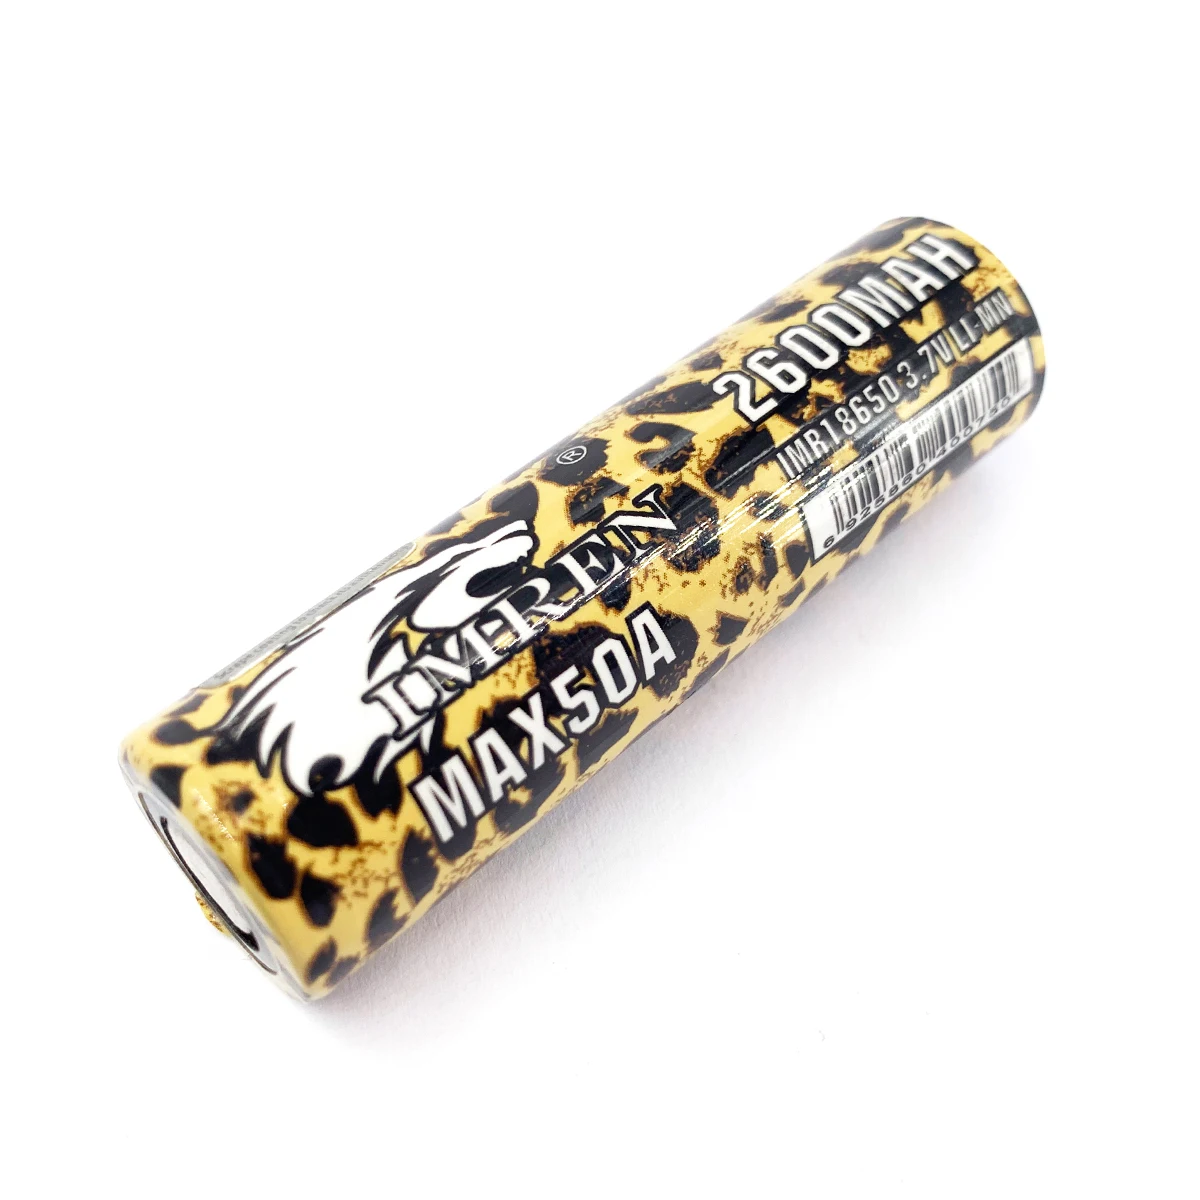 18650 OEM Battery cover  leopard color  2600mah 50a  rechargeable battery  for bike batteries electrical